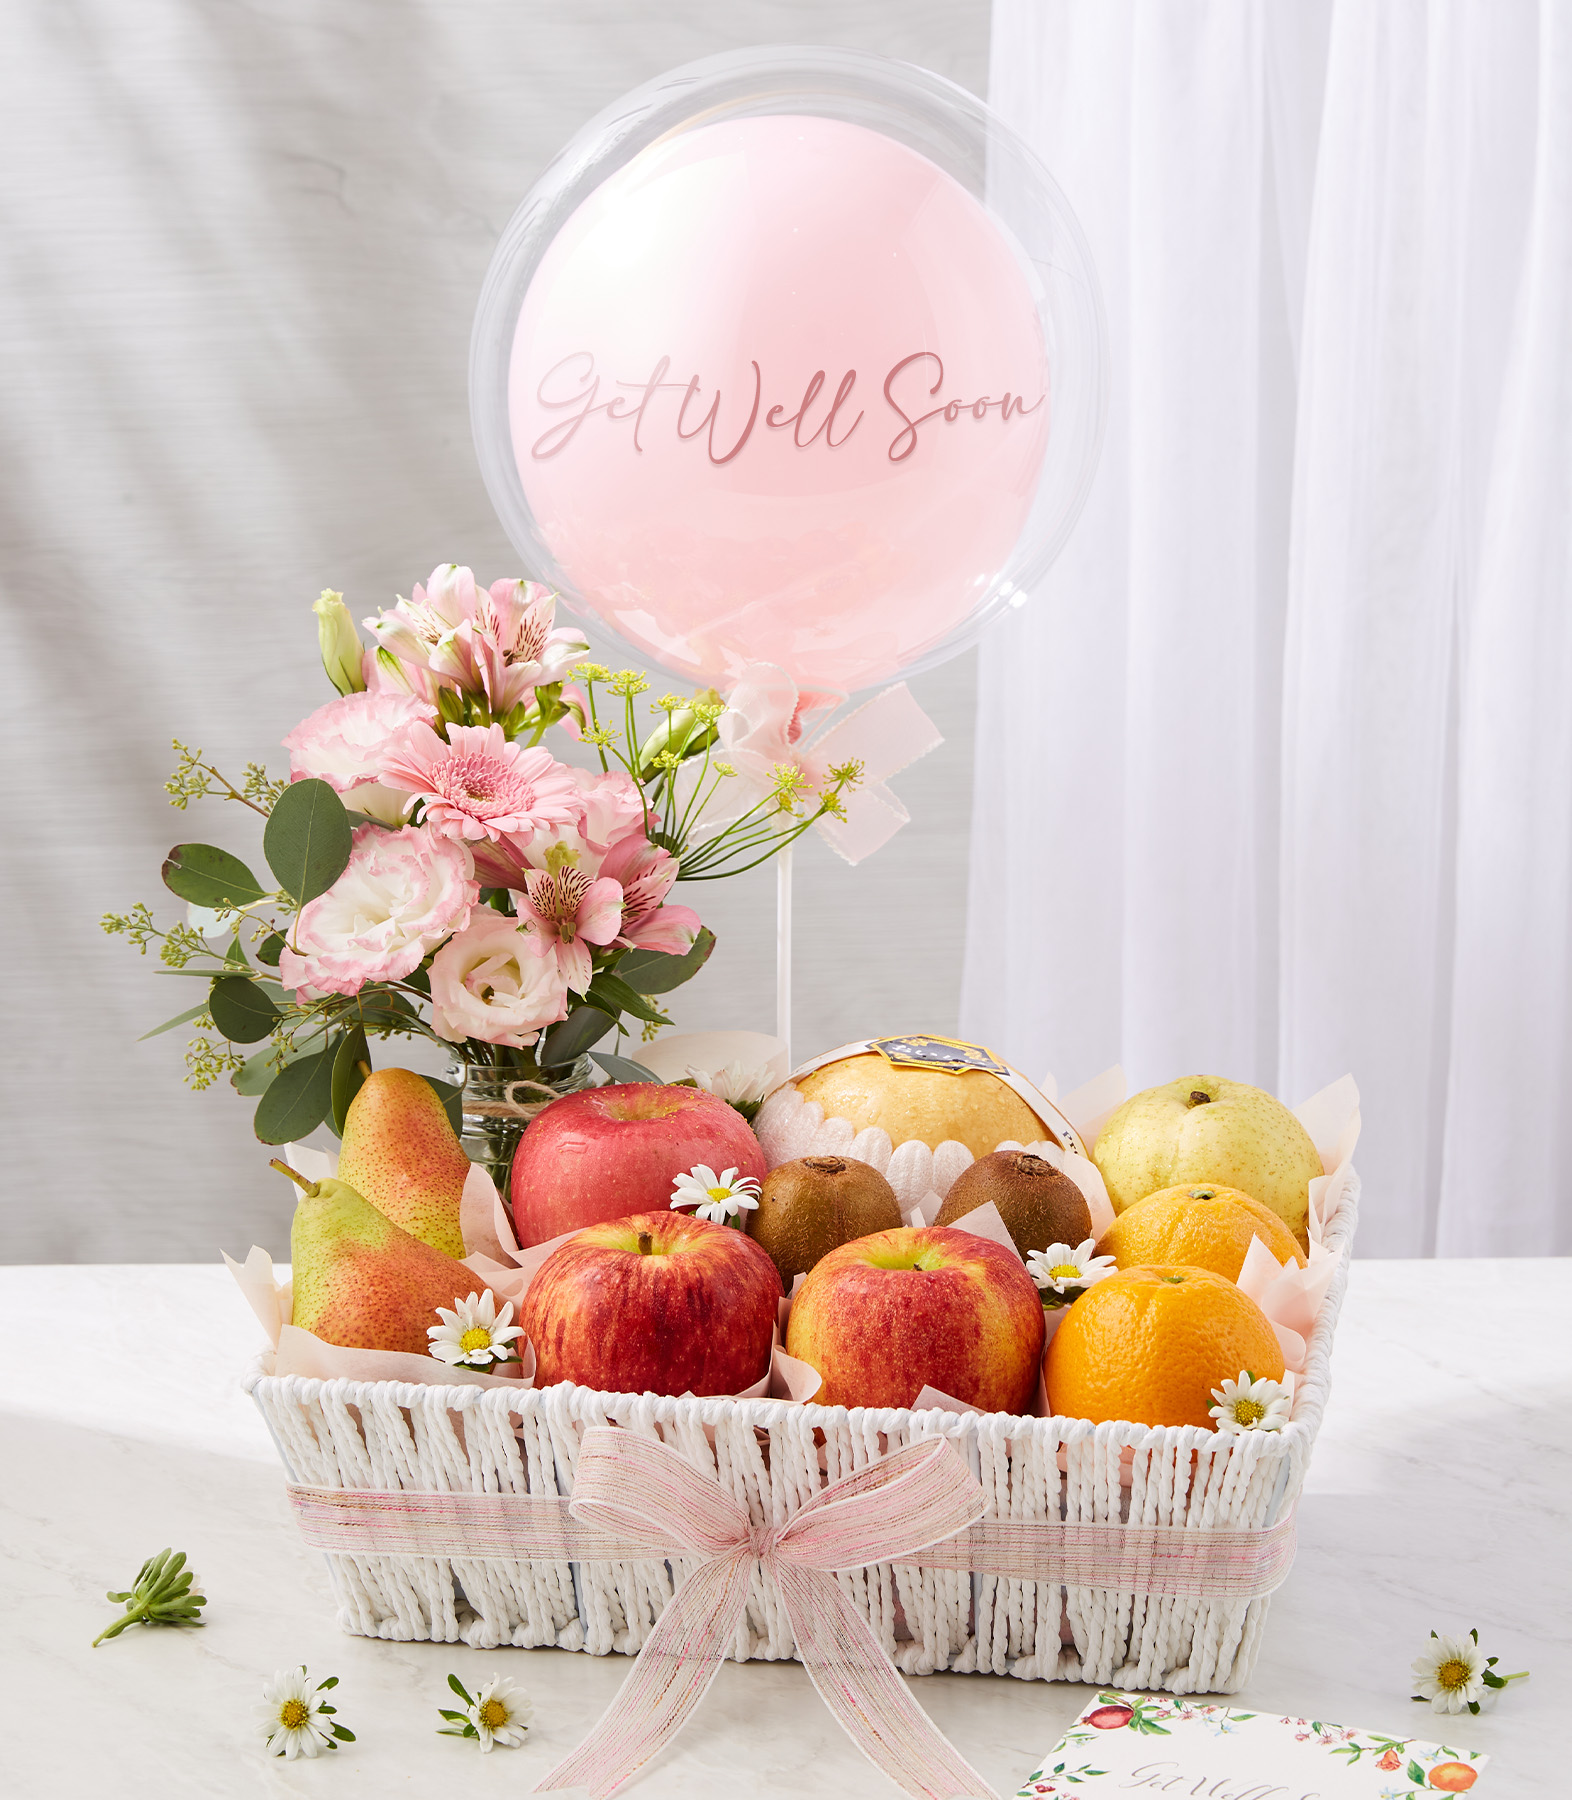 Fresh Fruits And Pink Get Well Soon Balloon In The White Basket With A Small Pink Flowers Vase